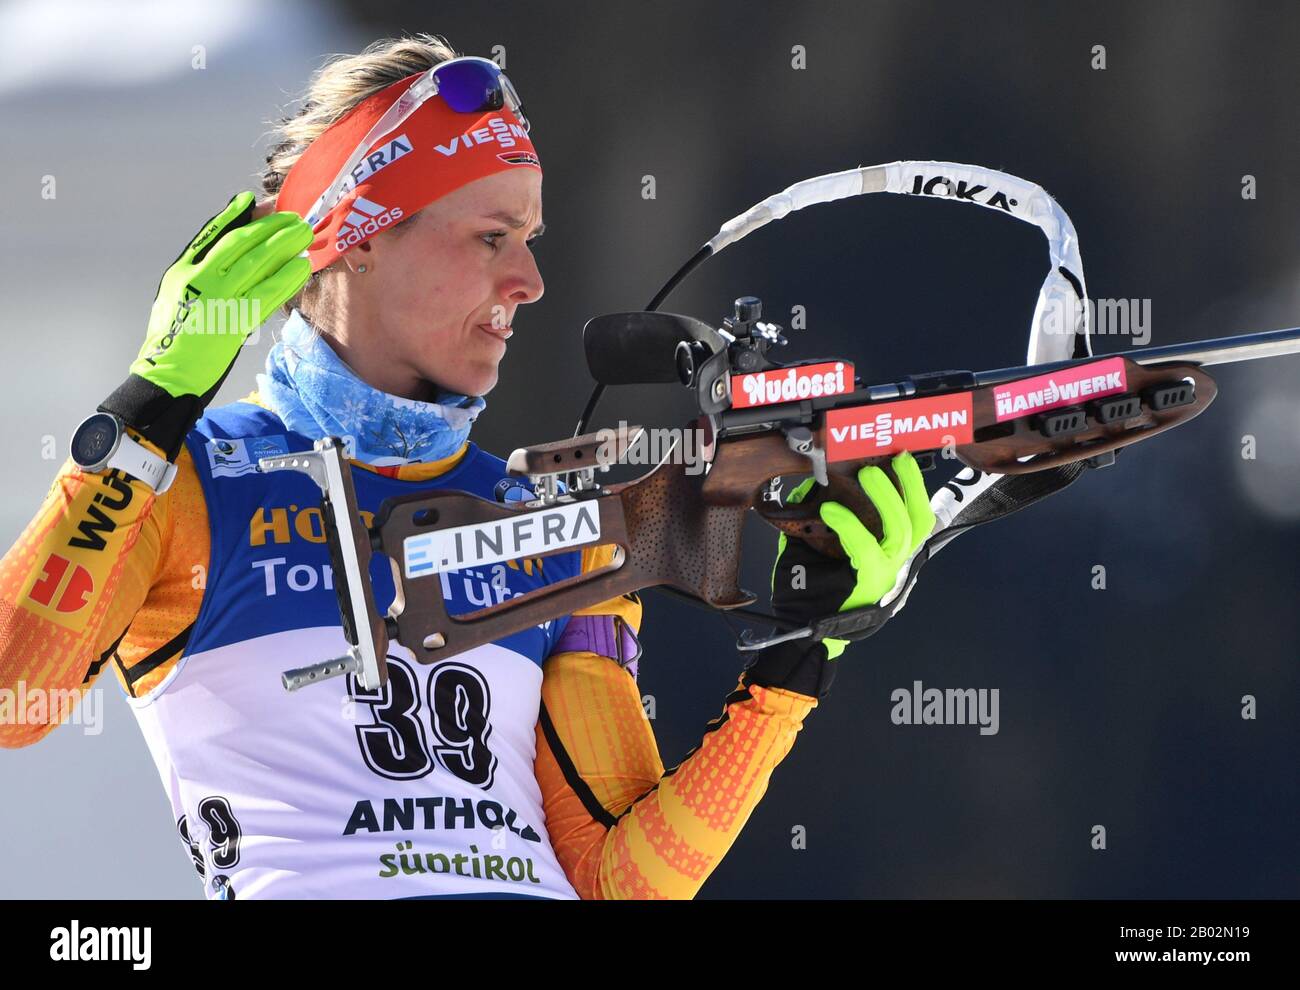 Antholz, Italy. 18th Aug, 2017. Biathlon: World Championship, 15 km singles, women. Denise Herrmann from Germany shooting before the competition. Credit: Hendrik Schmidt/dpa/Alamy Live News Stock Photo